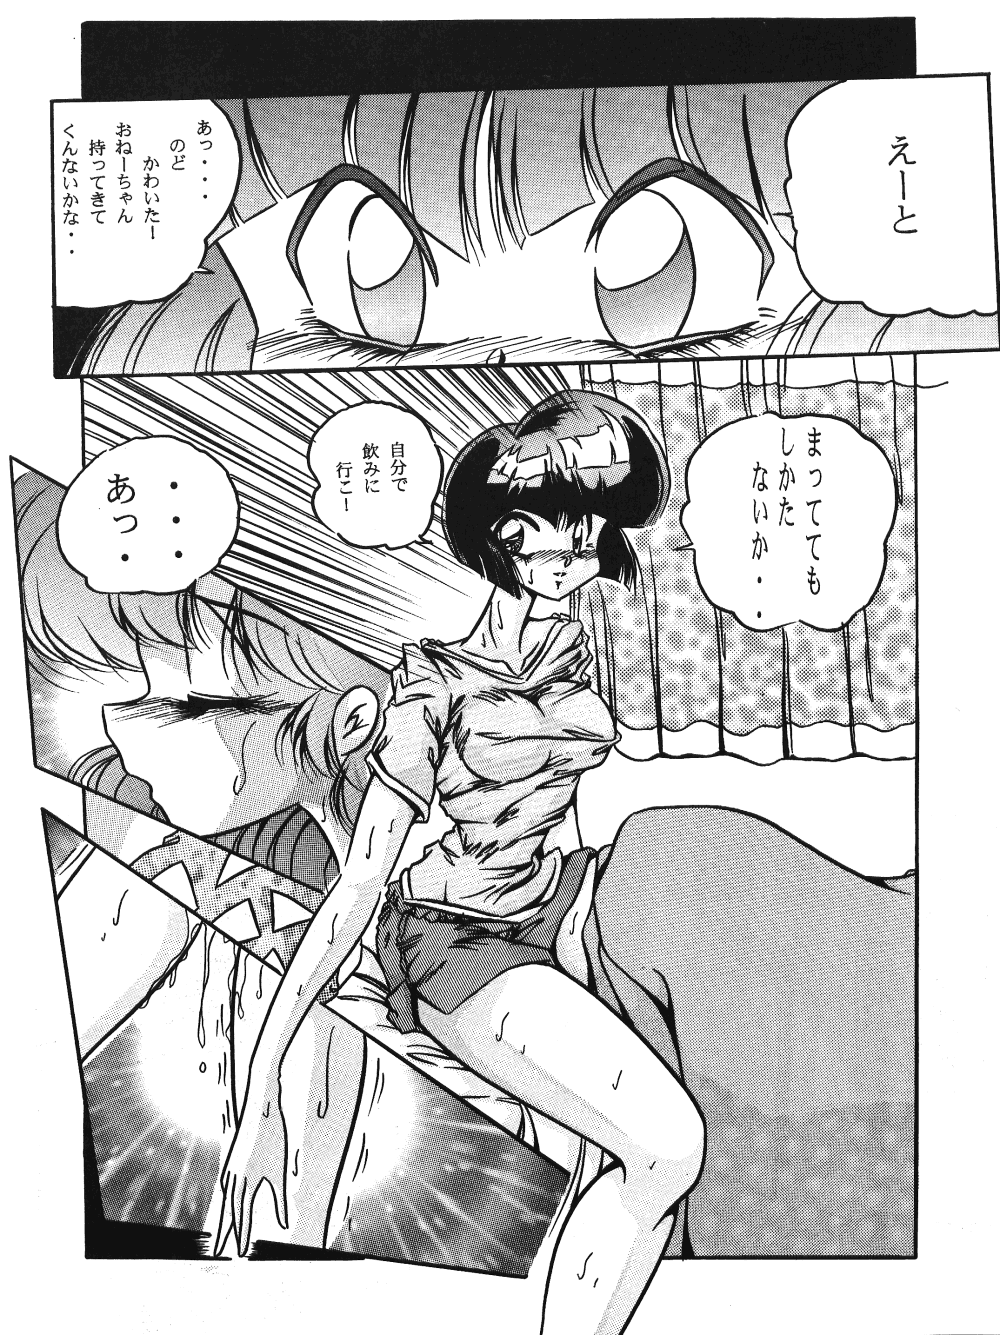 [C-COMPANY] C-COMPANY SPECIAL STAGE 18 (Ranma 1/2, Idol Project) page 9 full